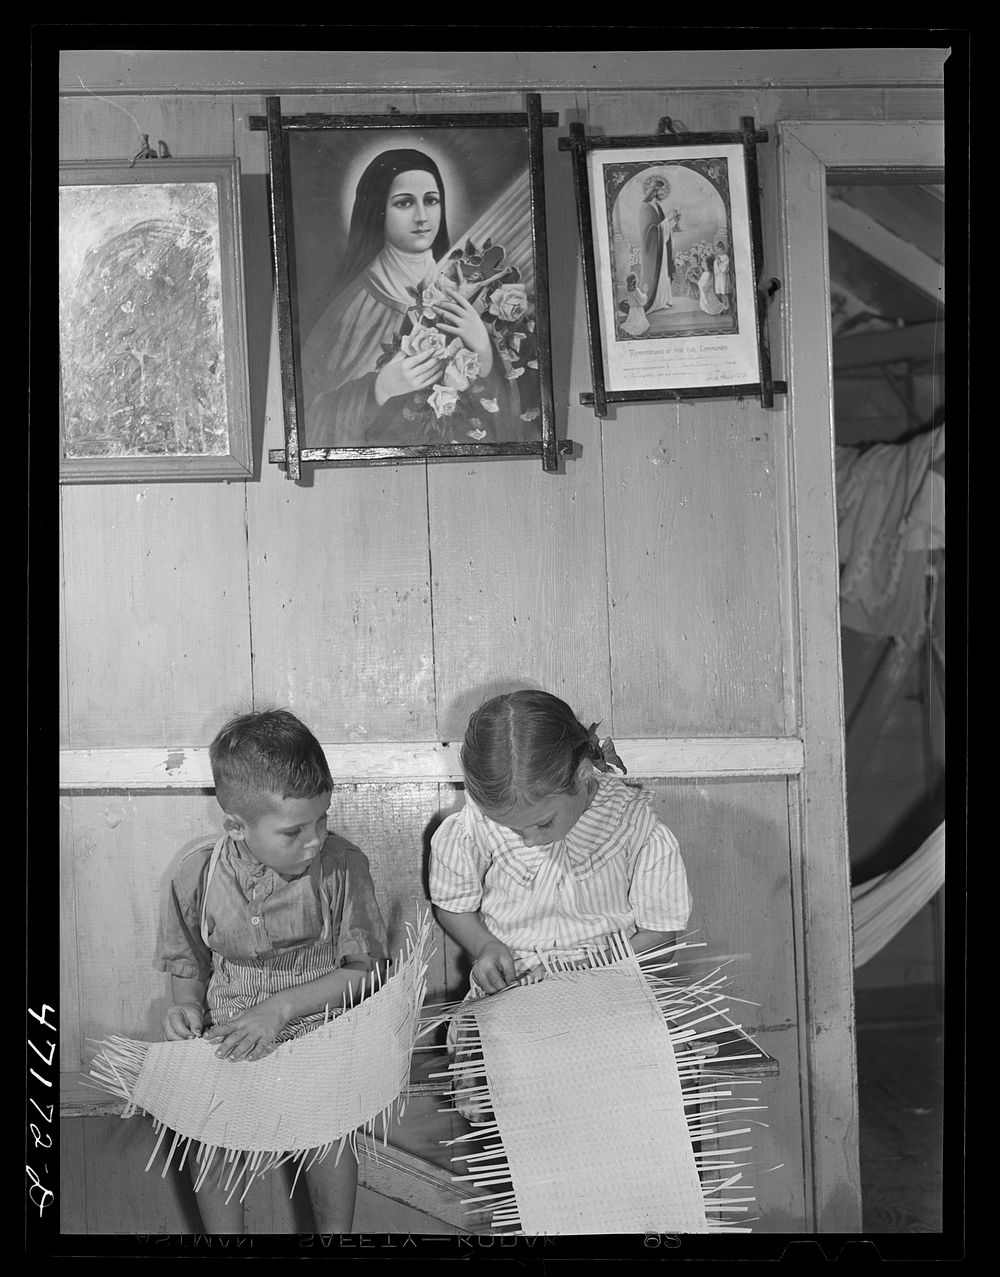 French village, a small settlement on Saint Thomas Island, Virgin Islands. French-speaking children weaving straw mats in…